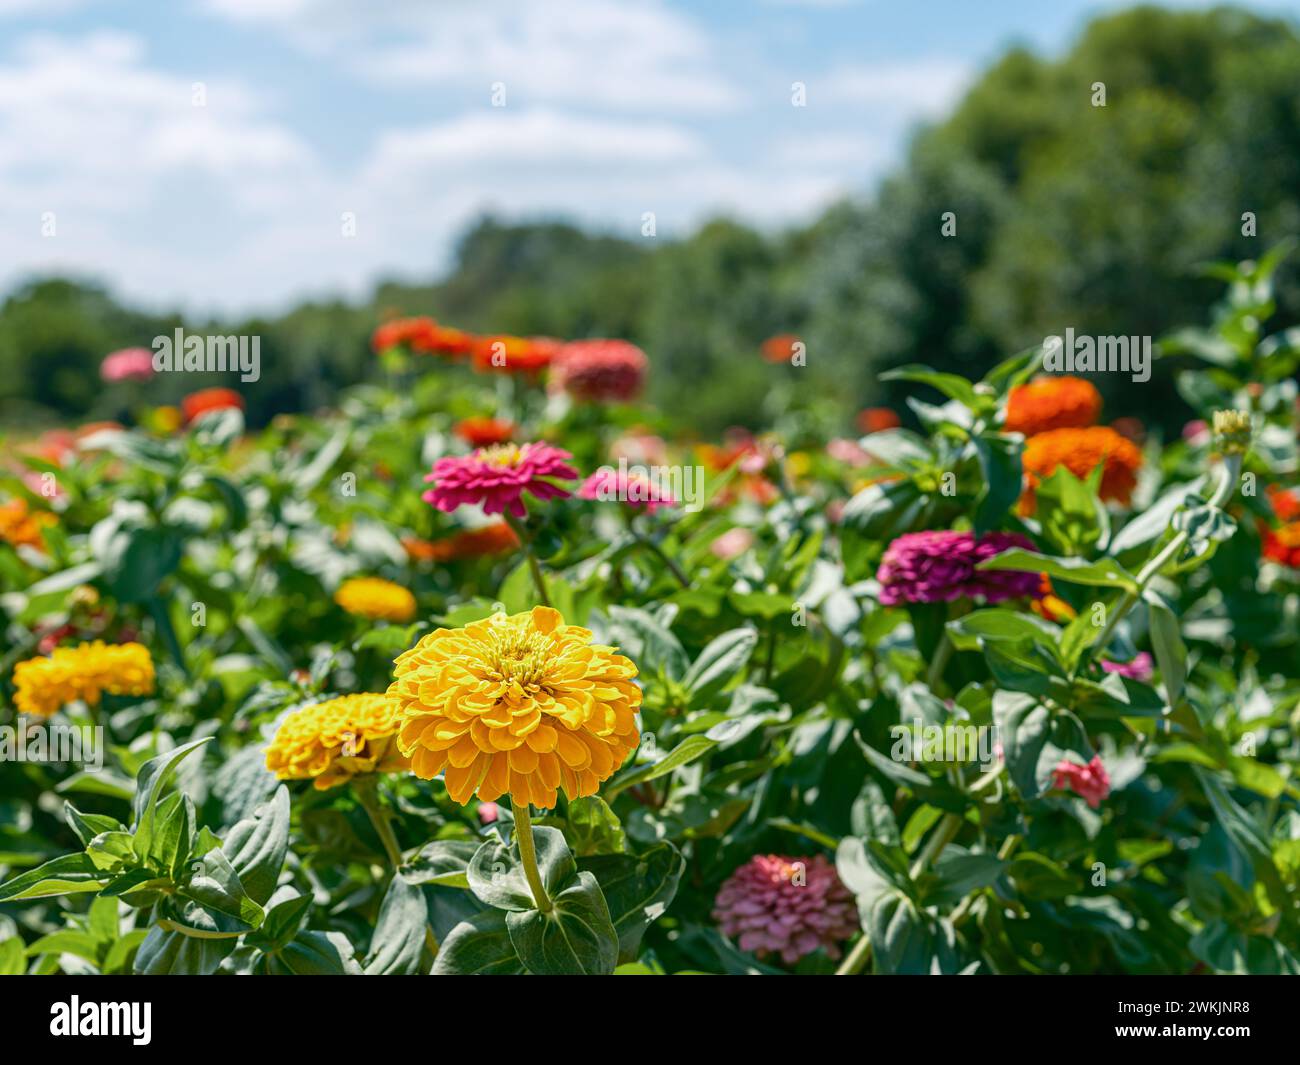 A Flower Field of Wild Chrysanthemums Blossom With Vibrant Colour Stock Photo